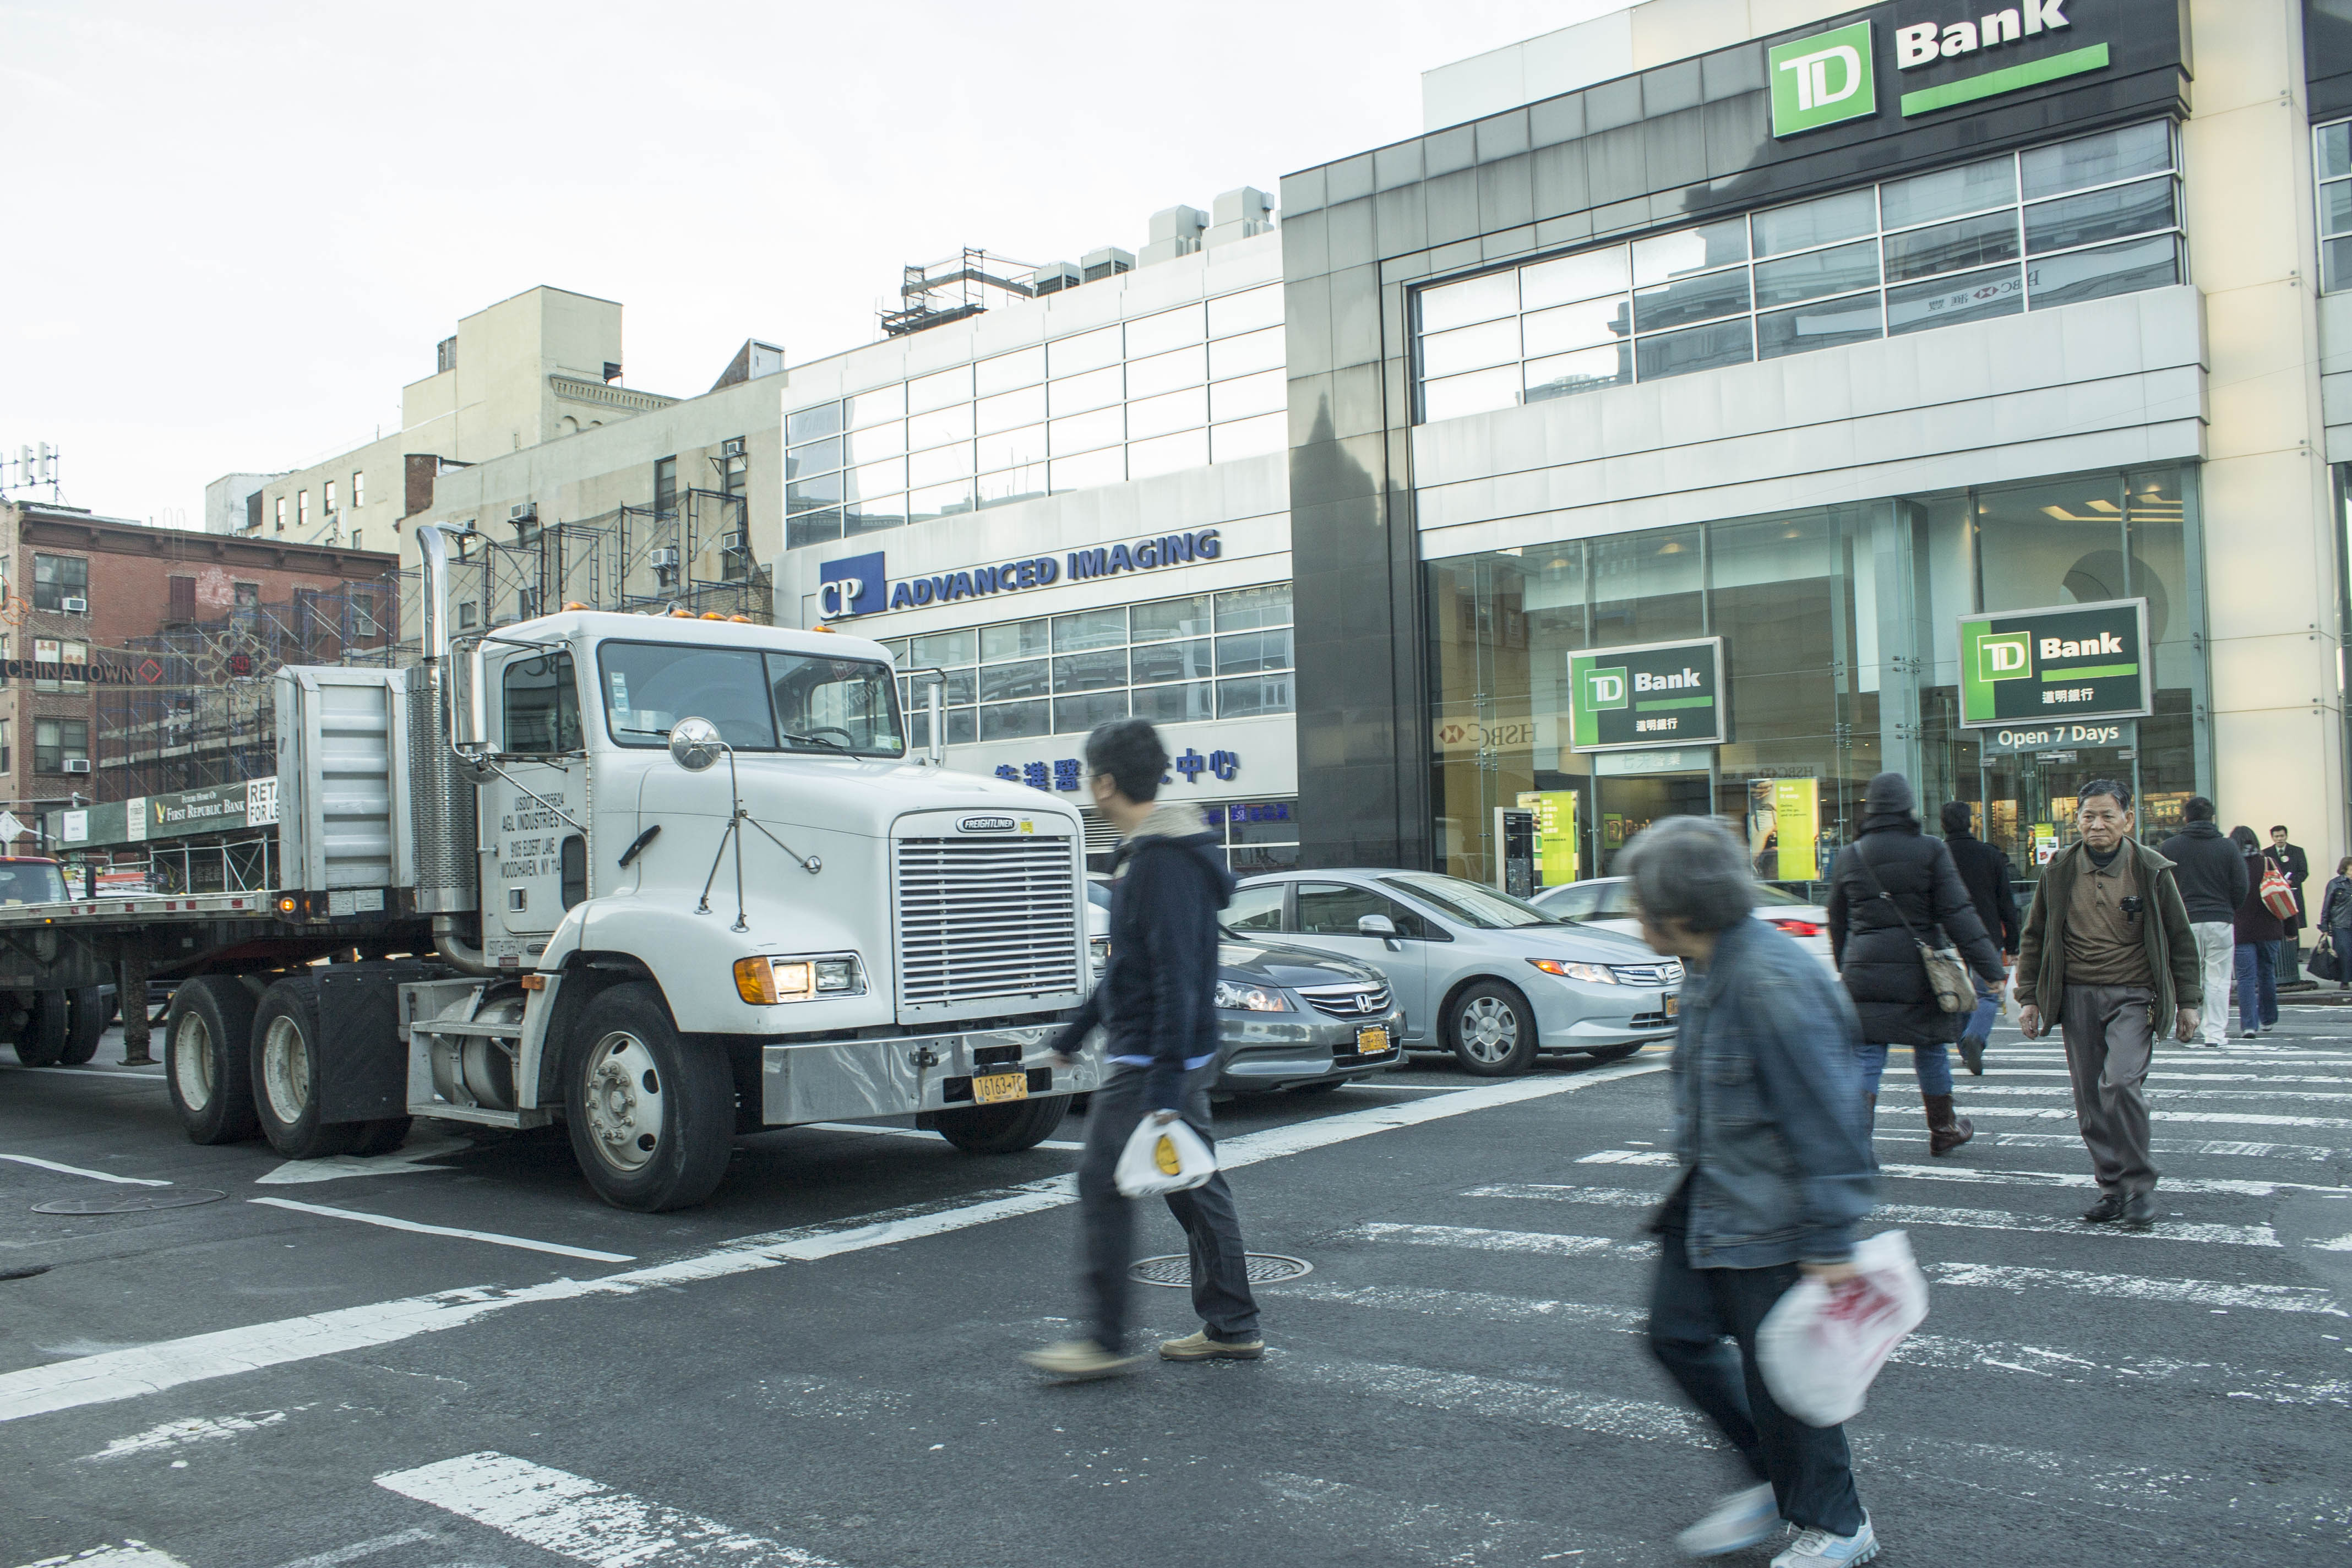 Canal St. is one of the dangerous corridors targeted for safety improvements in the new Vision Zero report for Manhattan.   Photo by Zach Williams